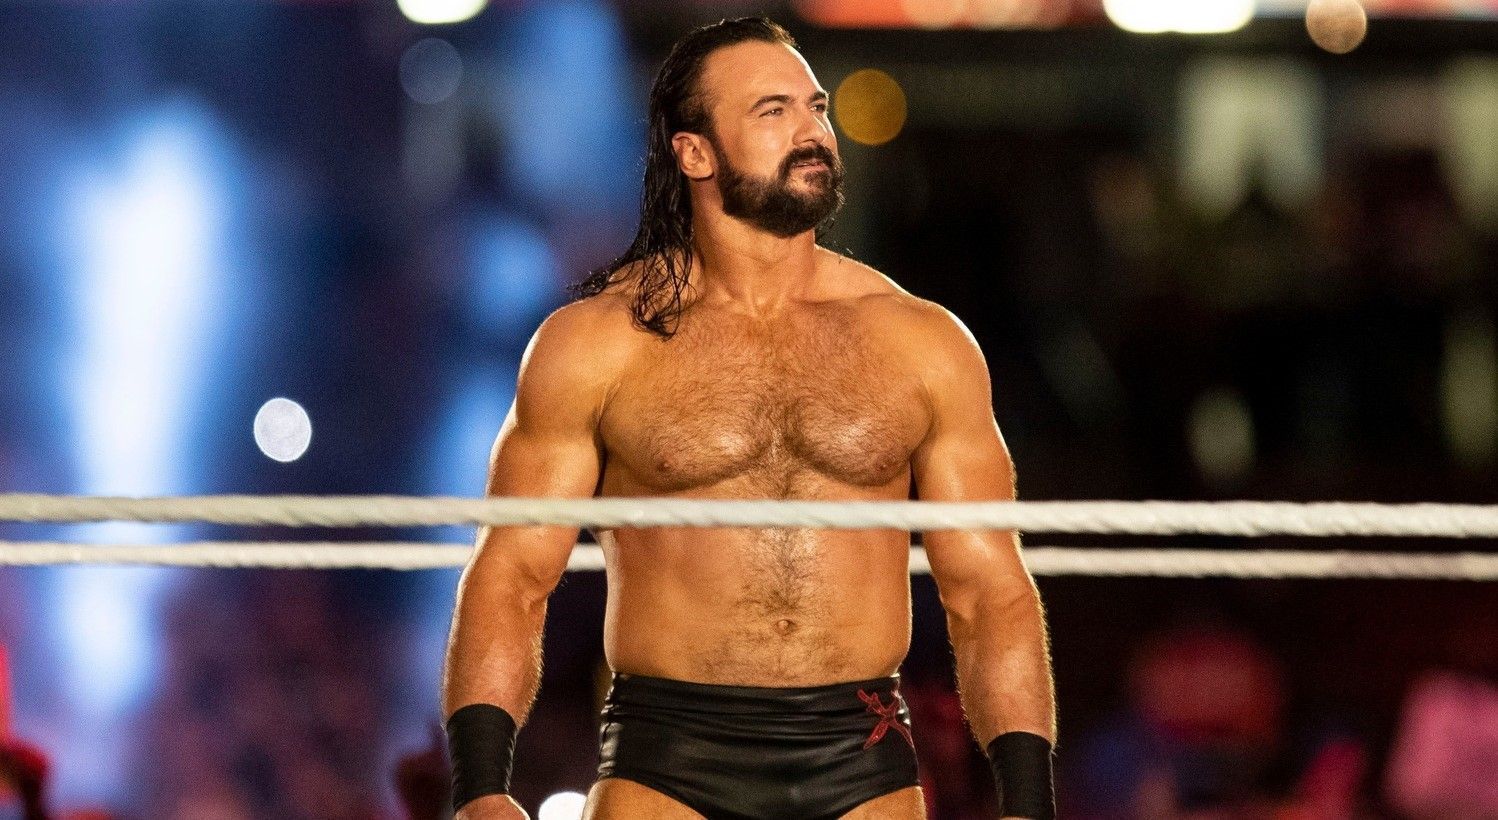 Drew McIntyre has reflected on his recent match